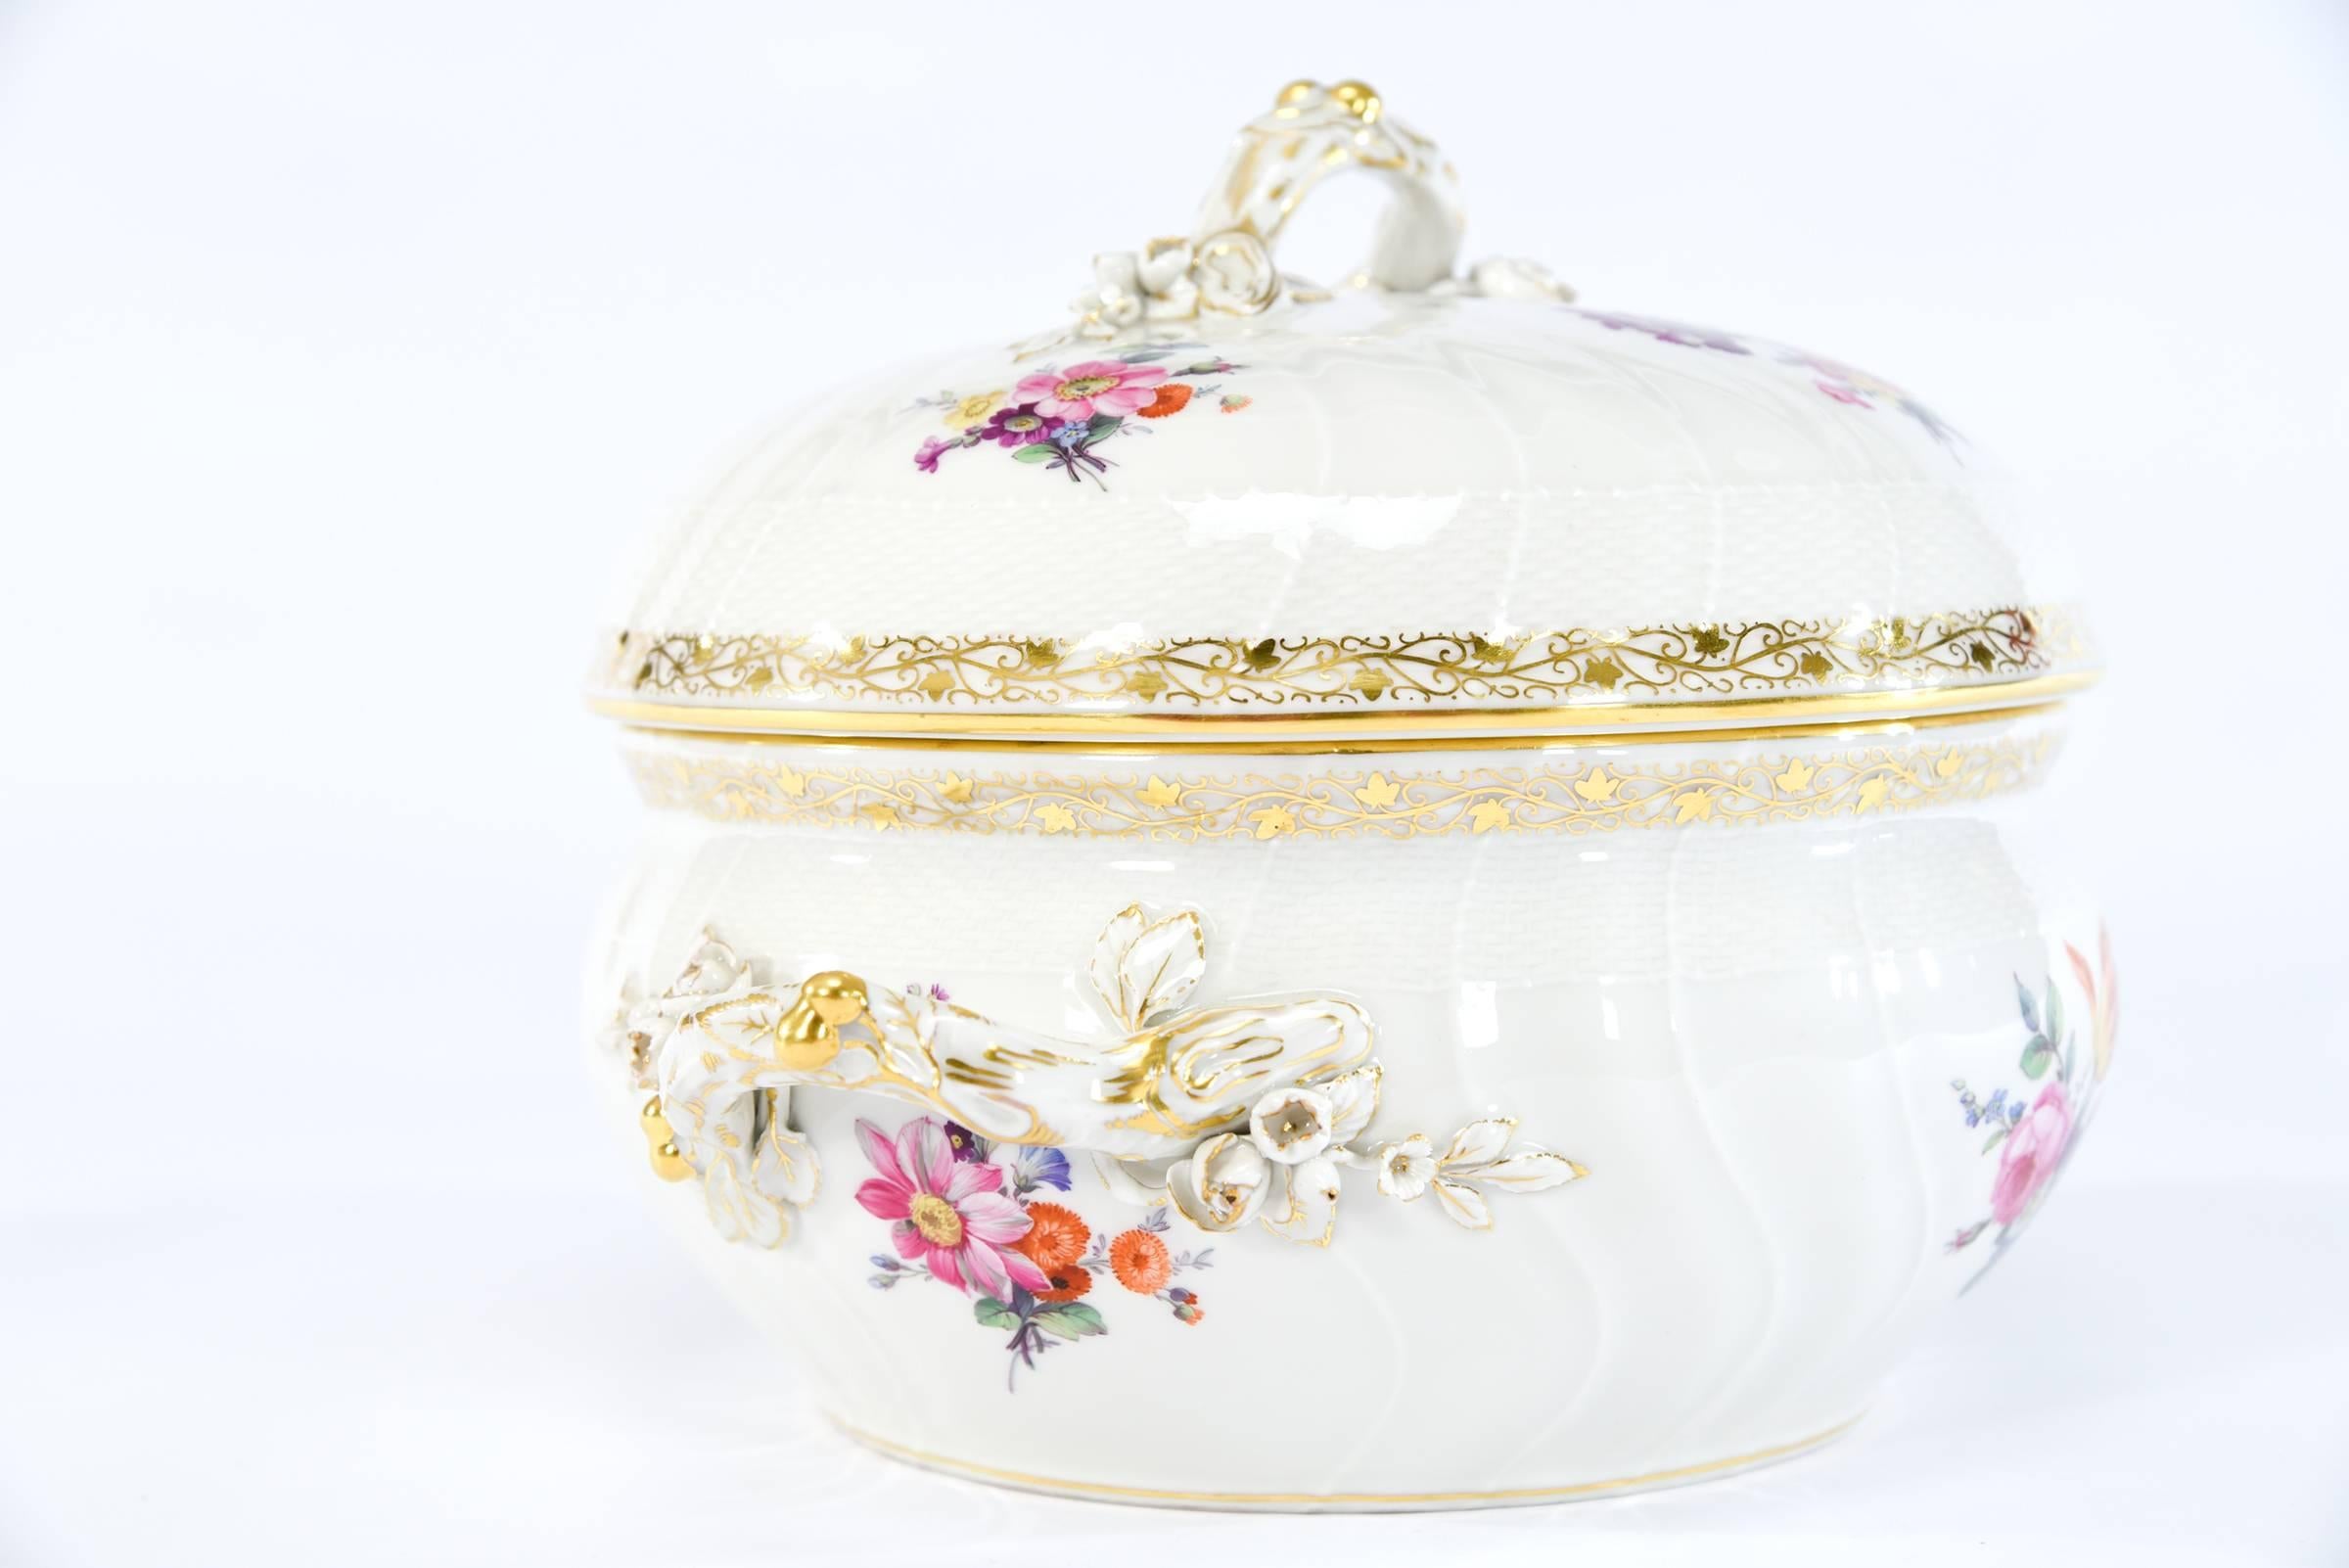 Sometimes it's nice to have a classic round soup tureen and this one made by KPM is a perfect example. The molded round body is embellished with detailed hand-painted polychrome floral decoration and the handles are shaped like branches with molded